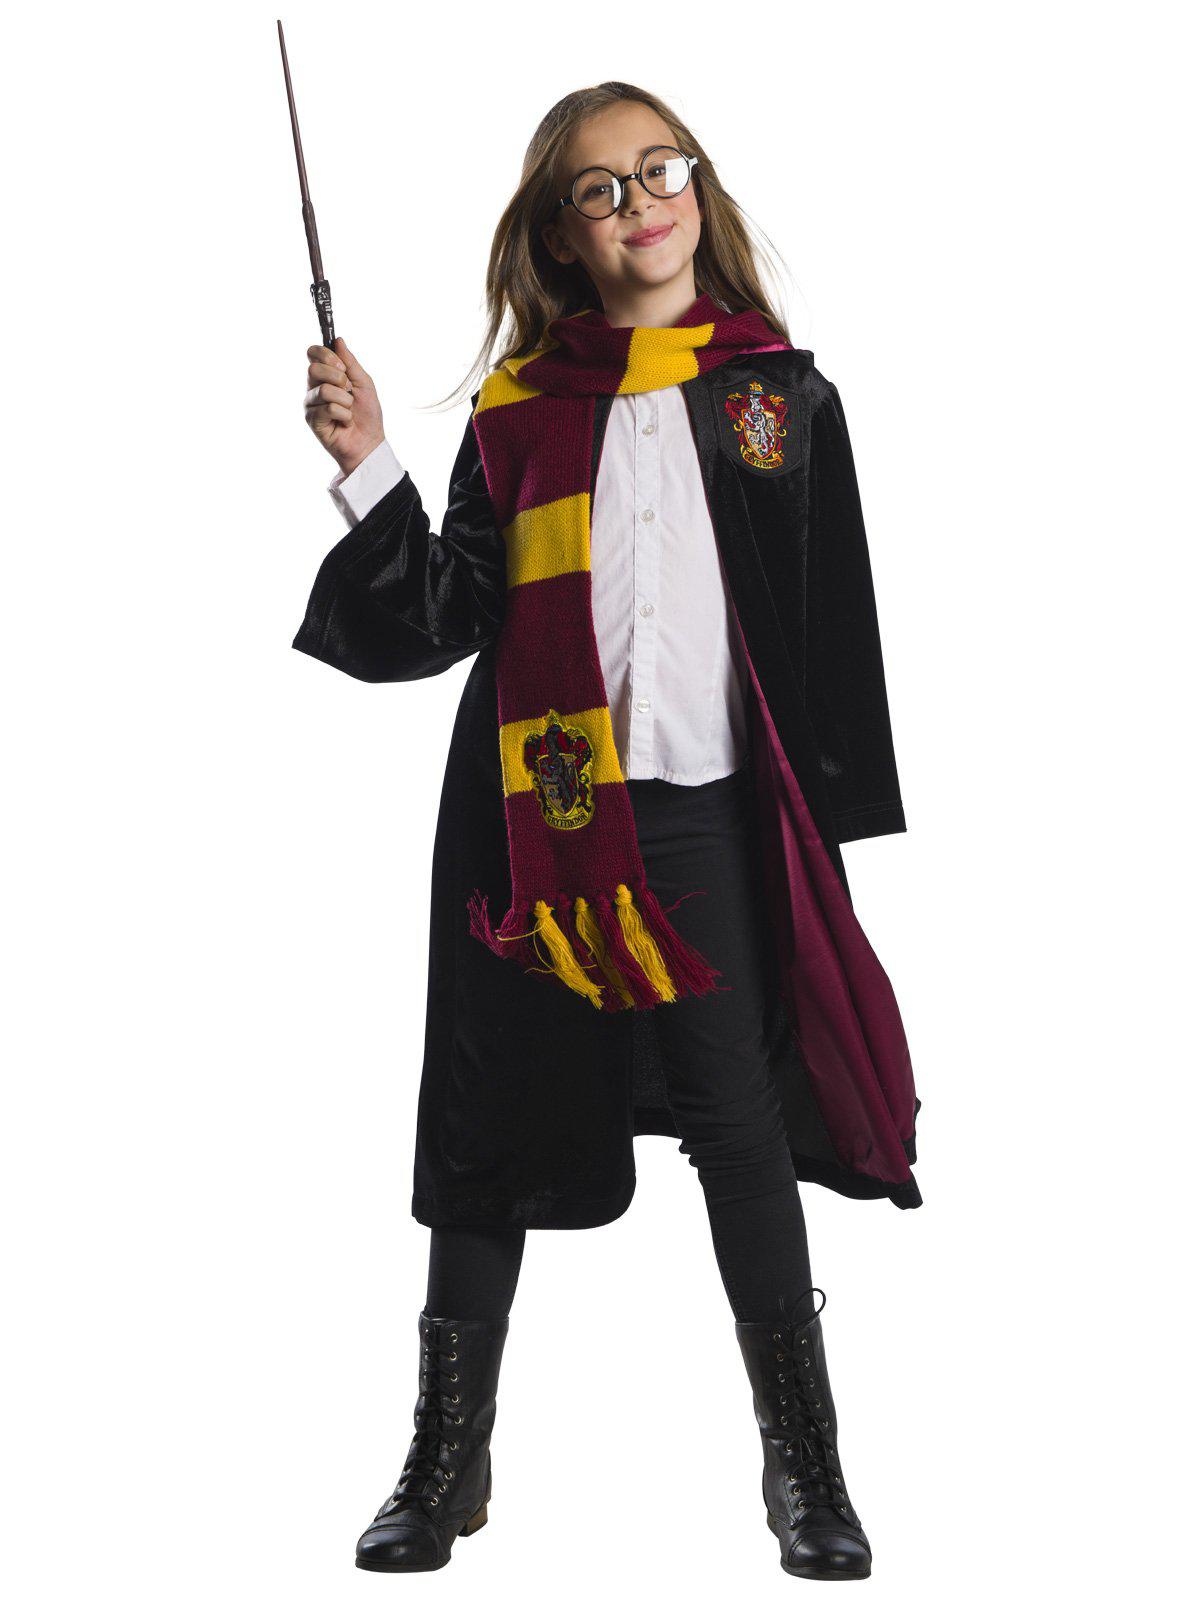 Harry Potter Deluxe Robe With Accessories Kids